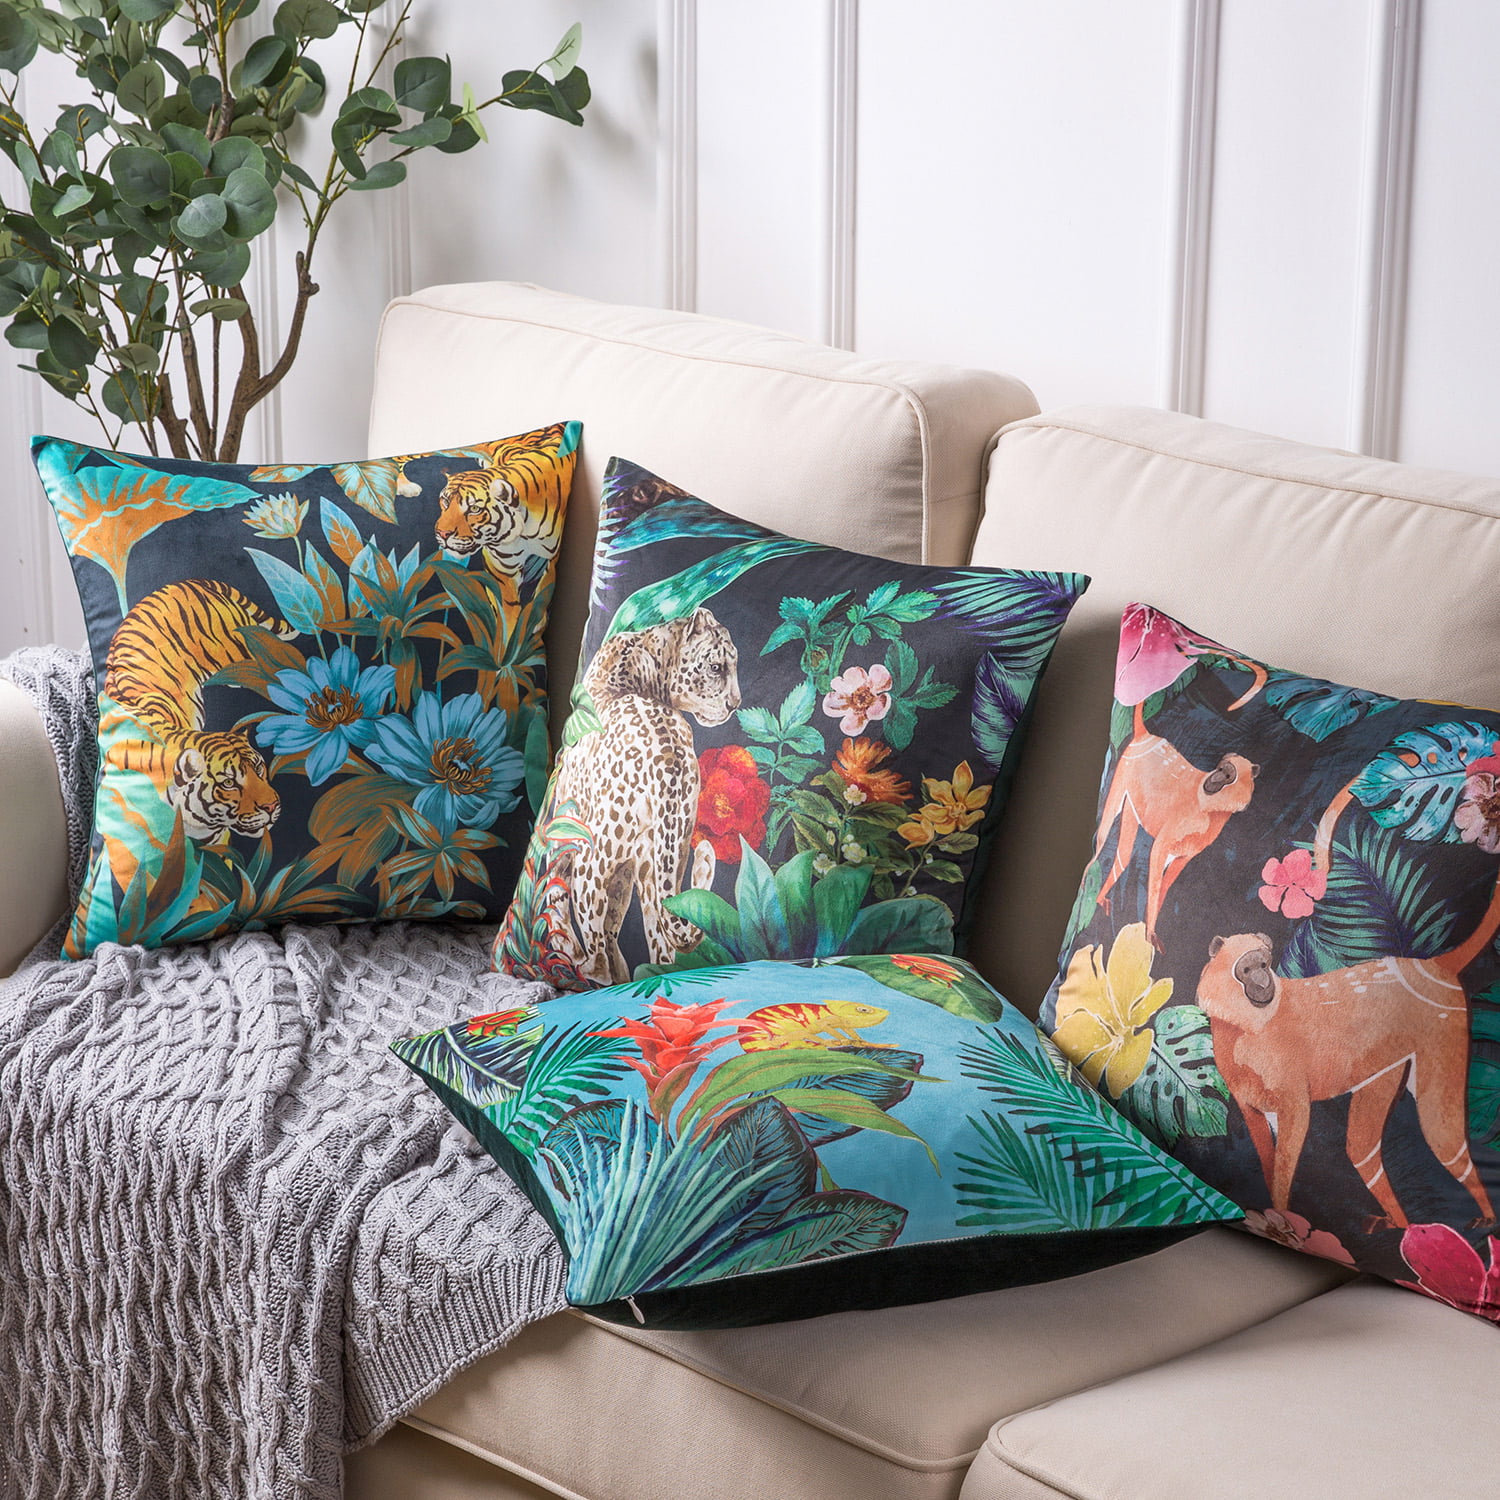 Phantoscope Tropical Series Decorative Throw Pillow Covers, Mysterious Jungle, 18" x 18", Set of